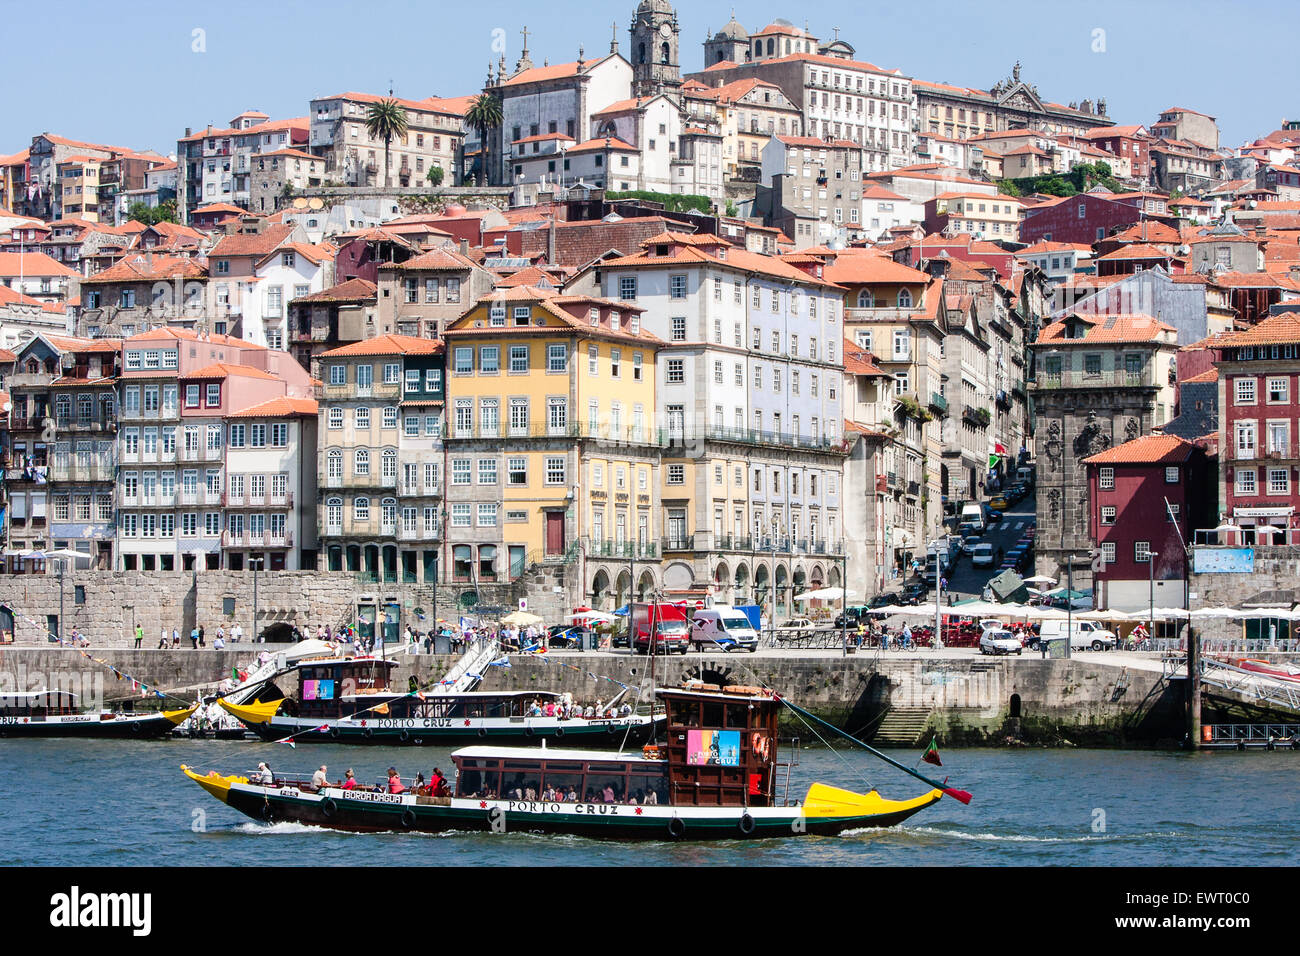 Tourist boat cruising along Douro River with the Ribeira district, the  medieval area on the north bank of Douro River. Porto, also known as  Oporto, is the second largest city in Portugal.